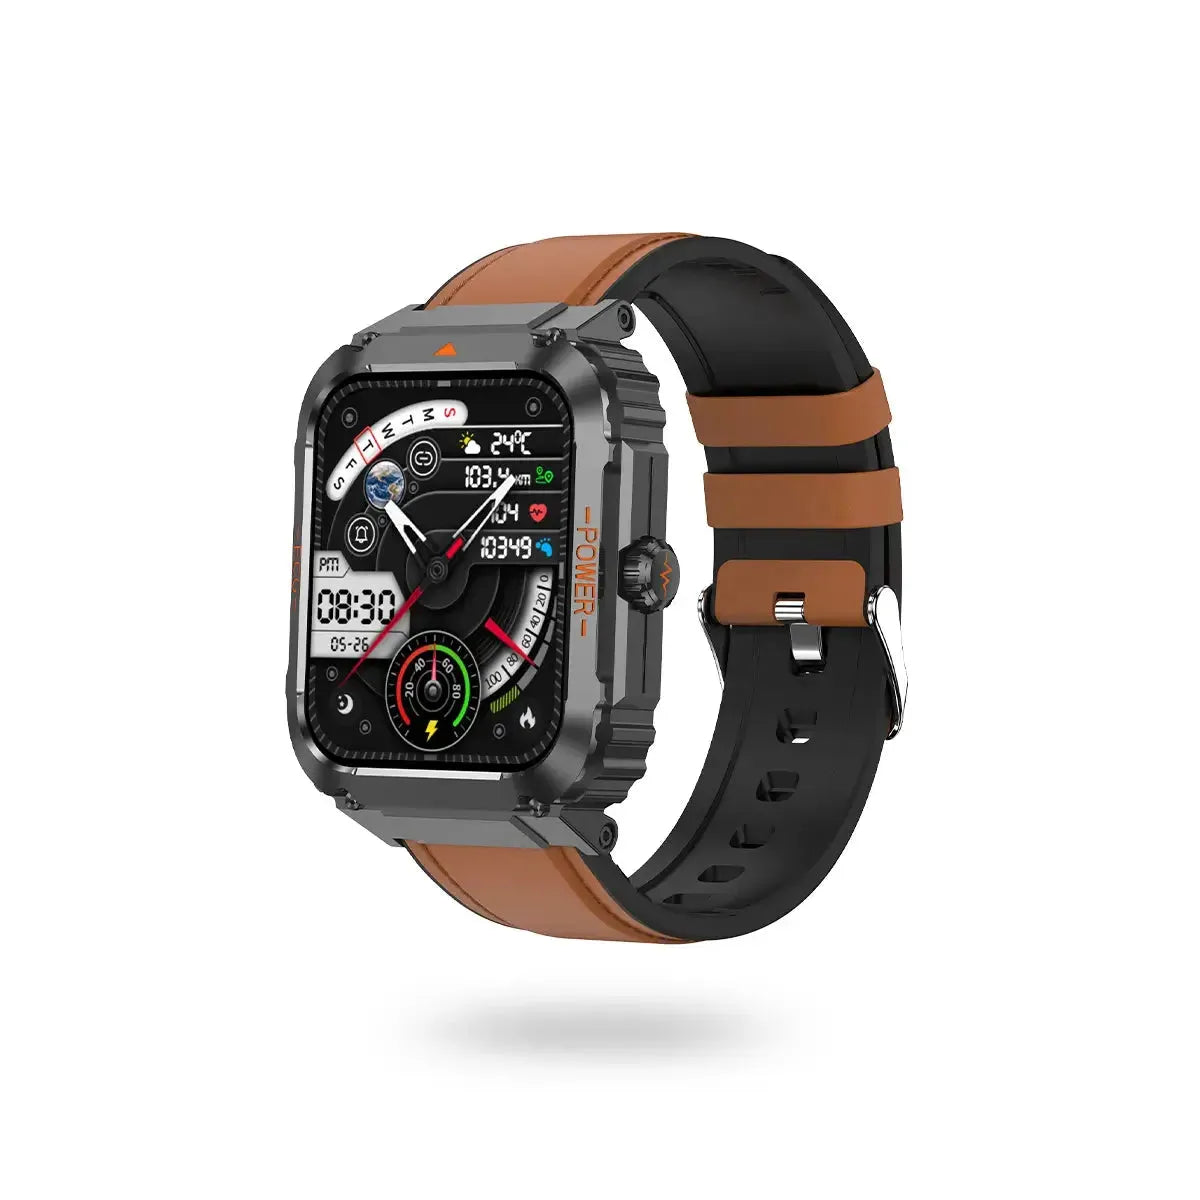 Tousains smartwatch S1 with brown leather strap